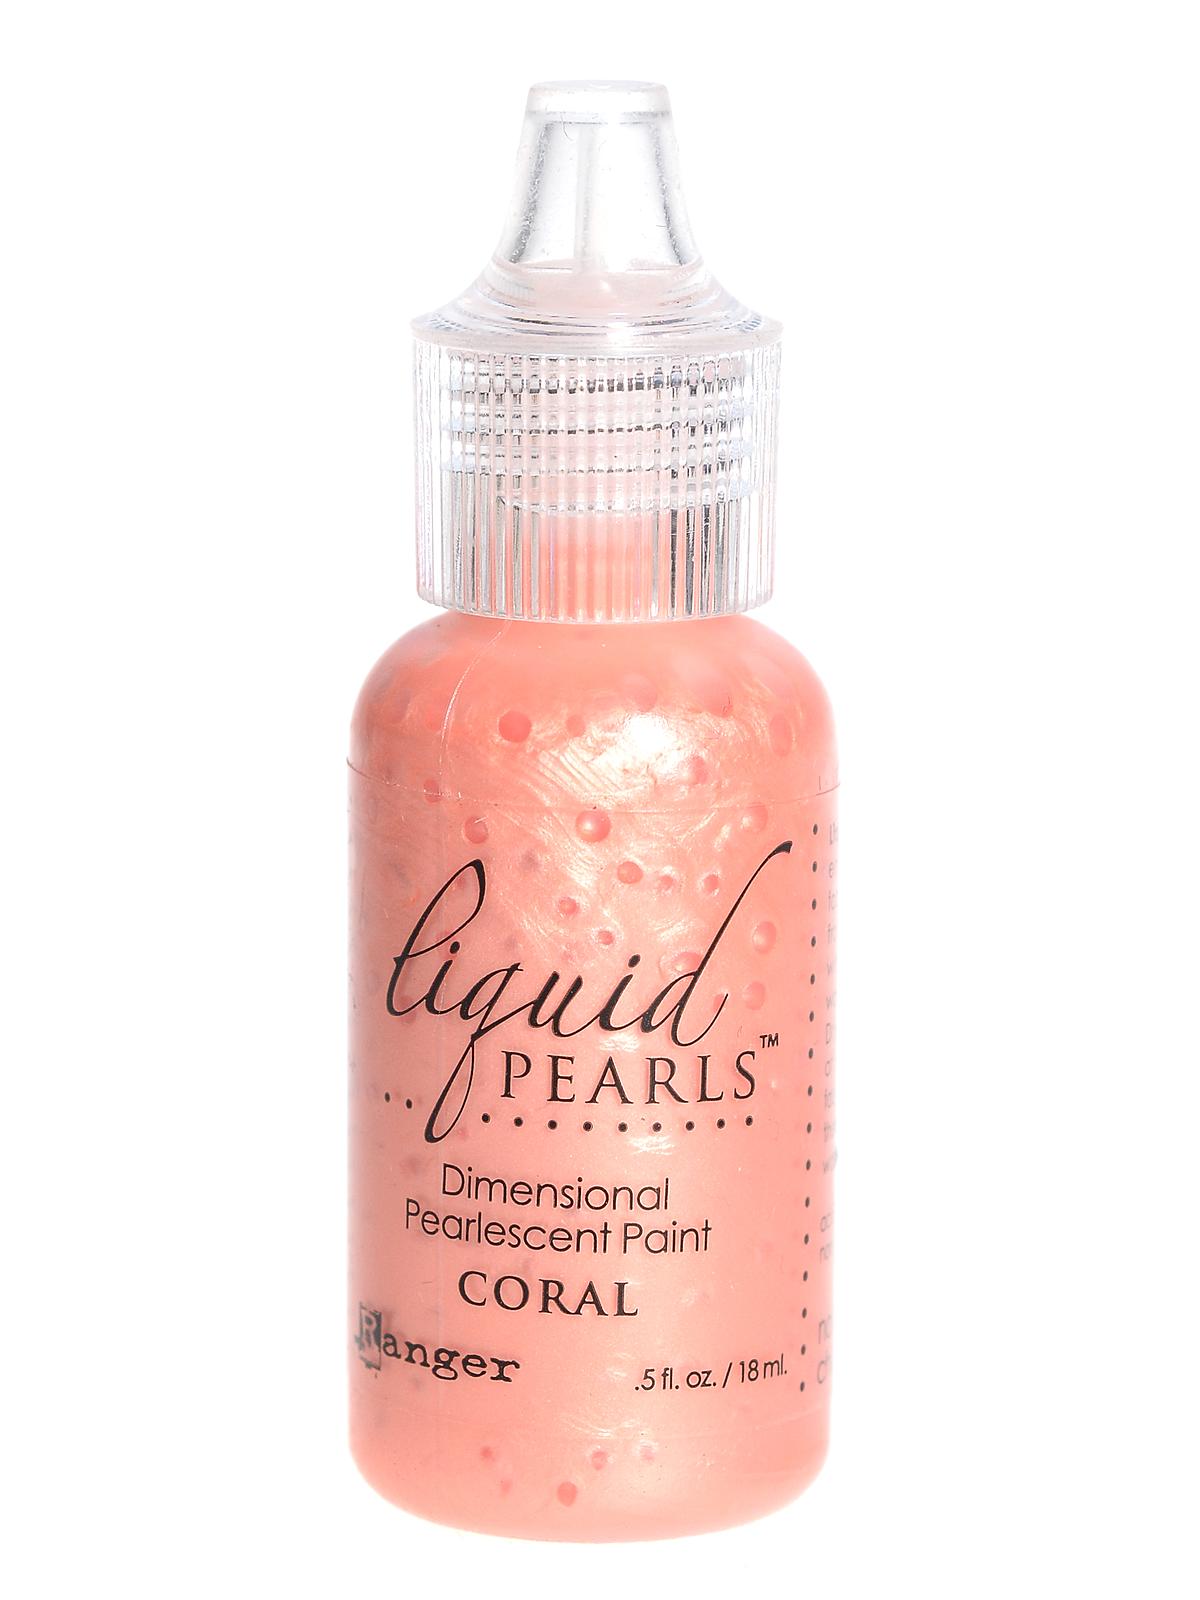 Liquid Pearls Pearlescent Paint Coral 0.5 Oz. Bottle